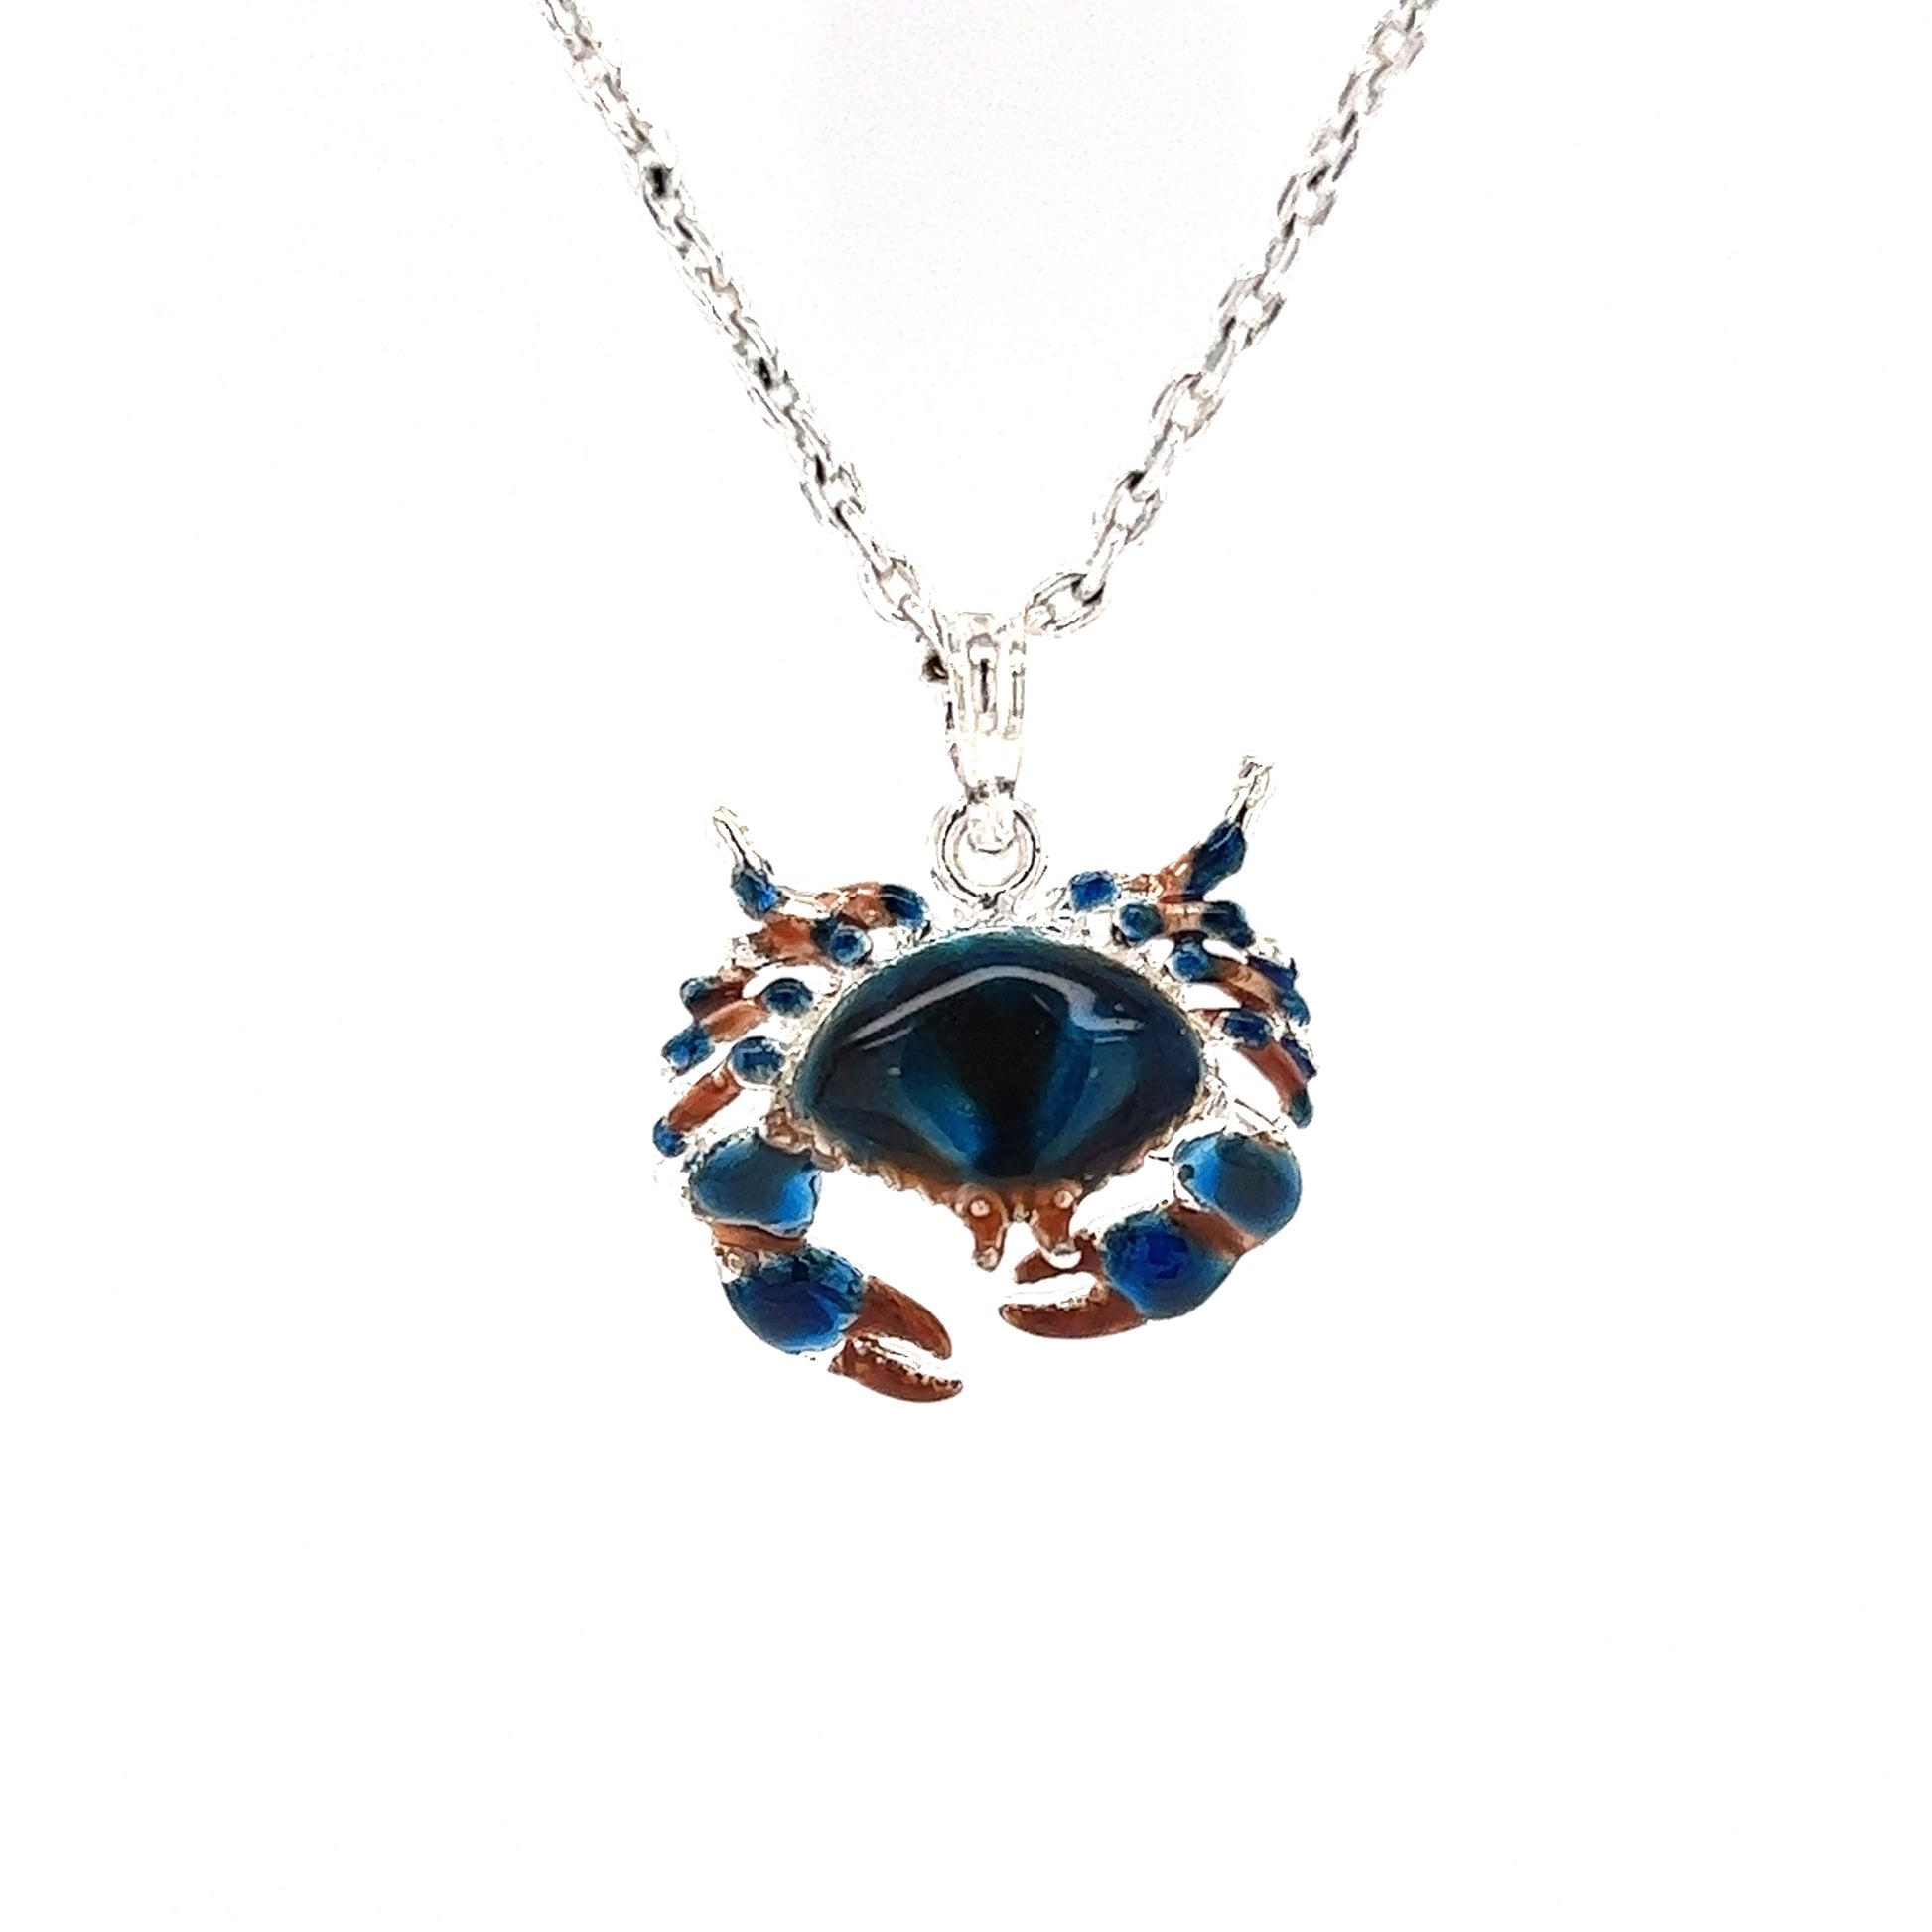 Blue Stone Crab Small Pendant with Enameling in Sterling Silver Front View with Chain